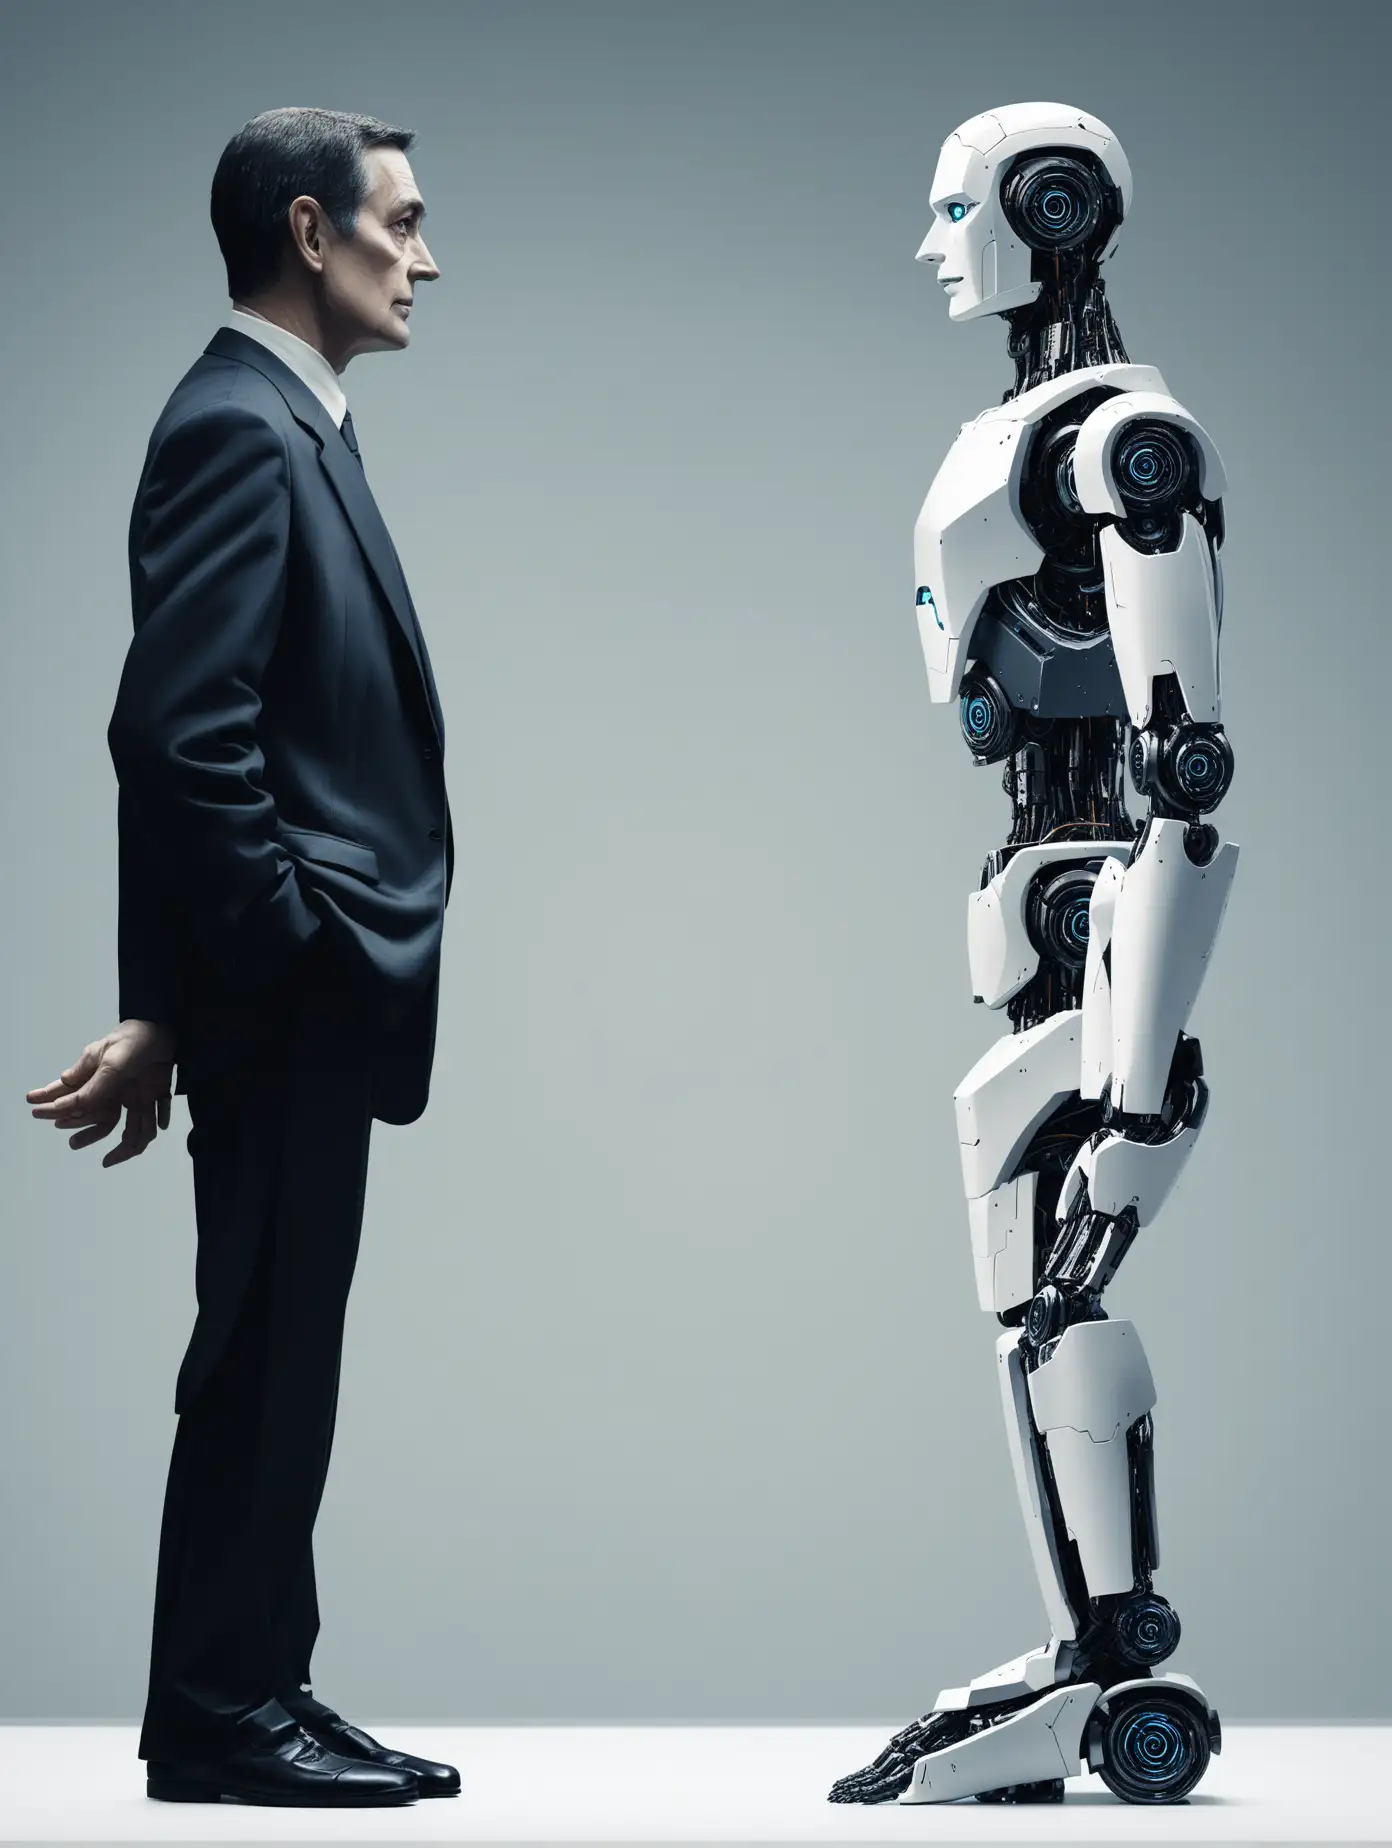 A man figure with two faces, one human looking to the left and the other of a robot looking to the right